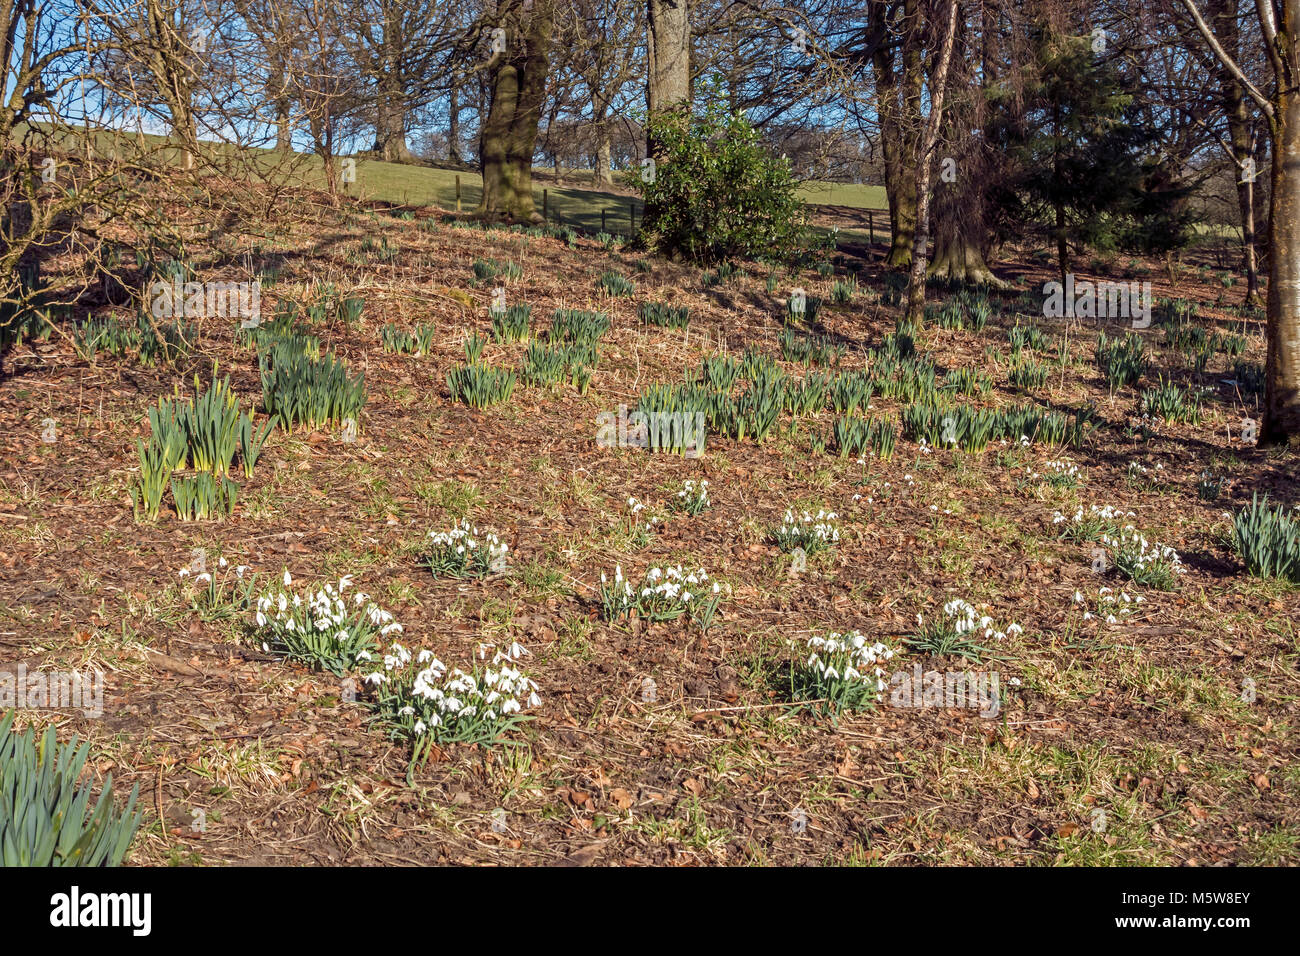 Colzium Estate & Visitor Centre in near Kilsyth in North Lanarkshire Scotland UK here showing snowdrops flowers in the walled garden Stock Photo